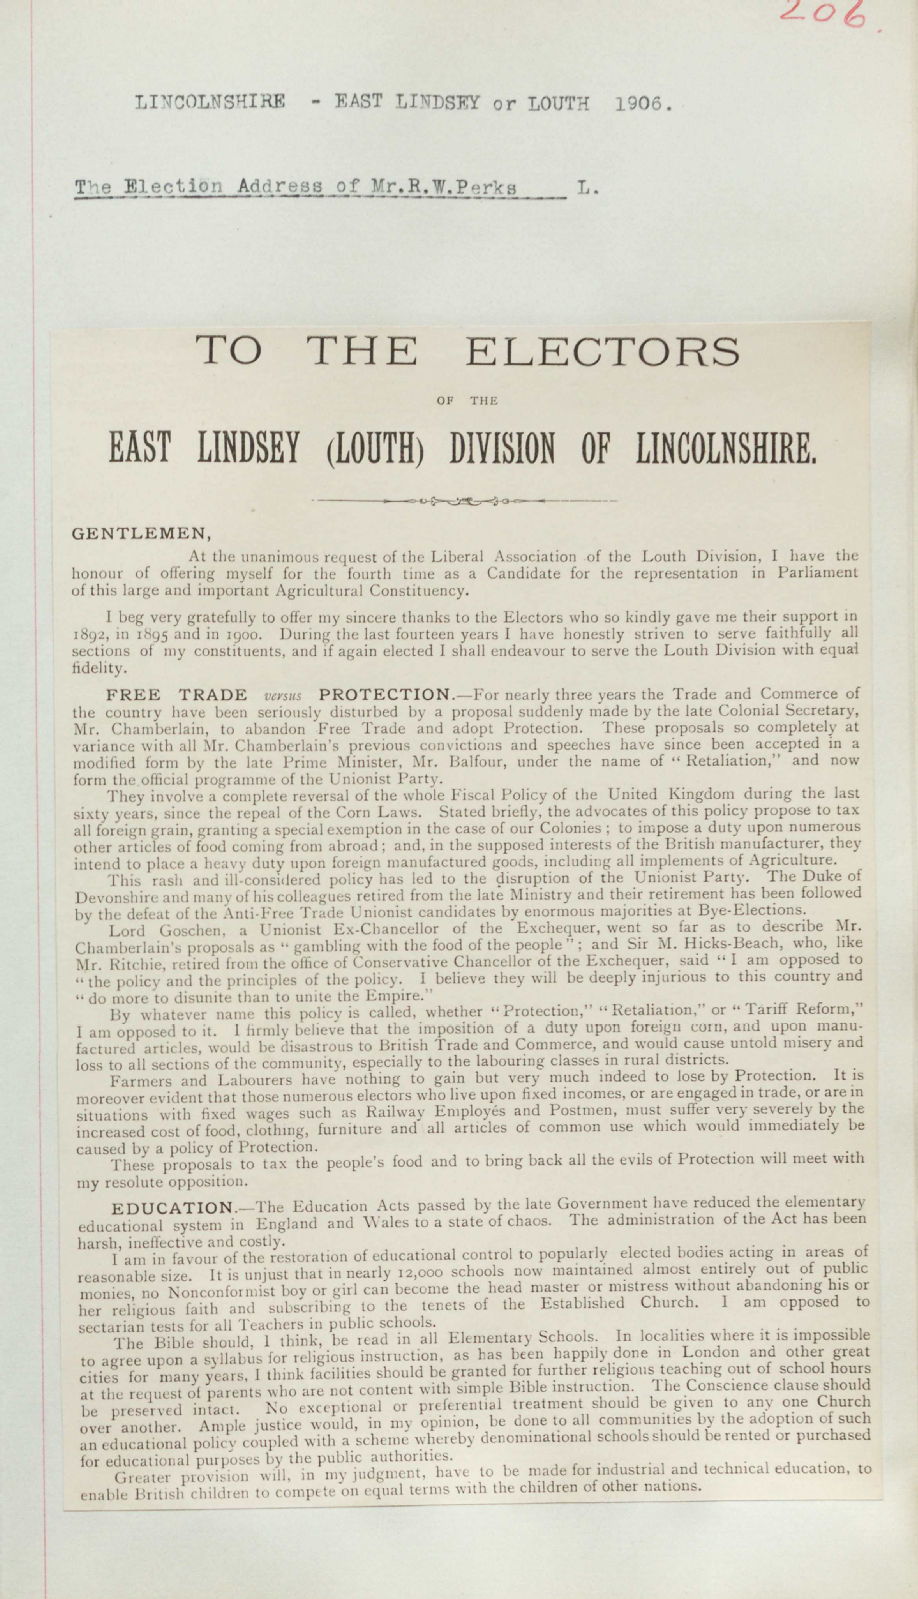 Election address of R.W. Perks, 1906